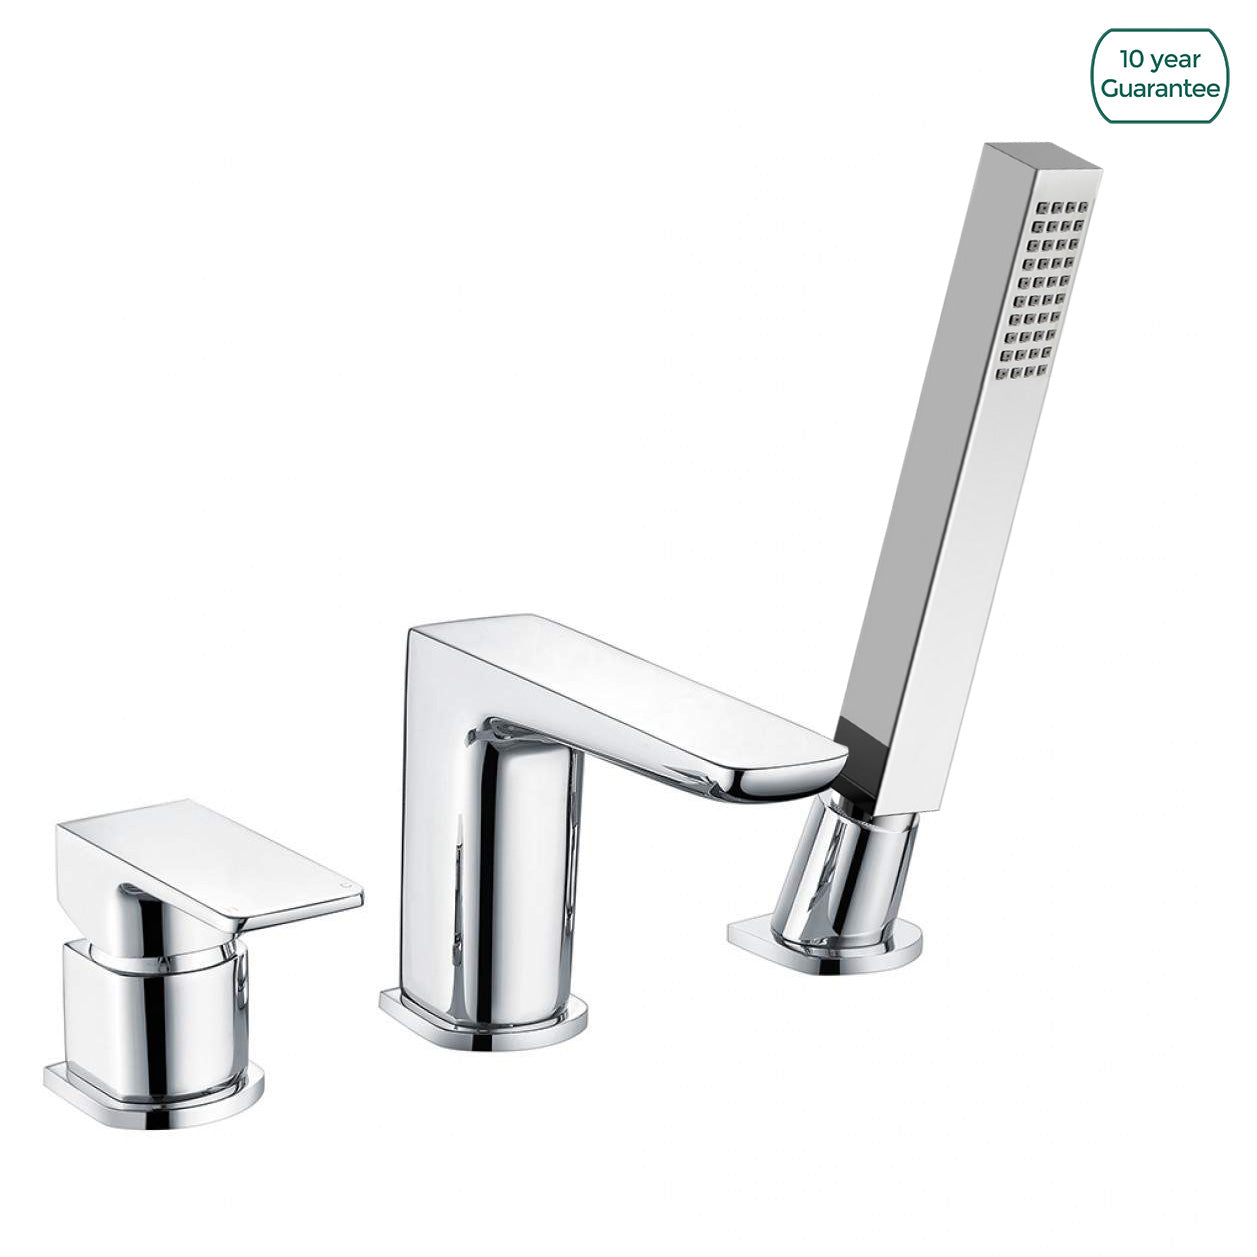 Astra Contemporary Chrome Deck Mounted Bath Filler Tap With Shower Handset